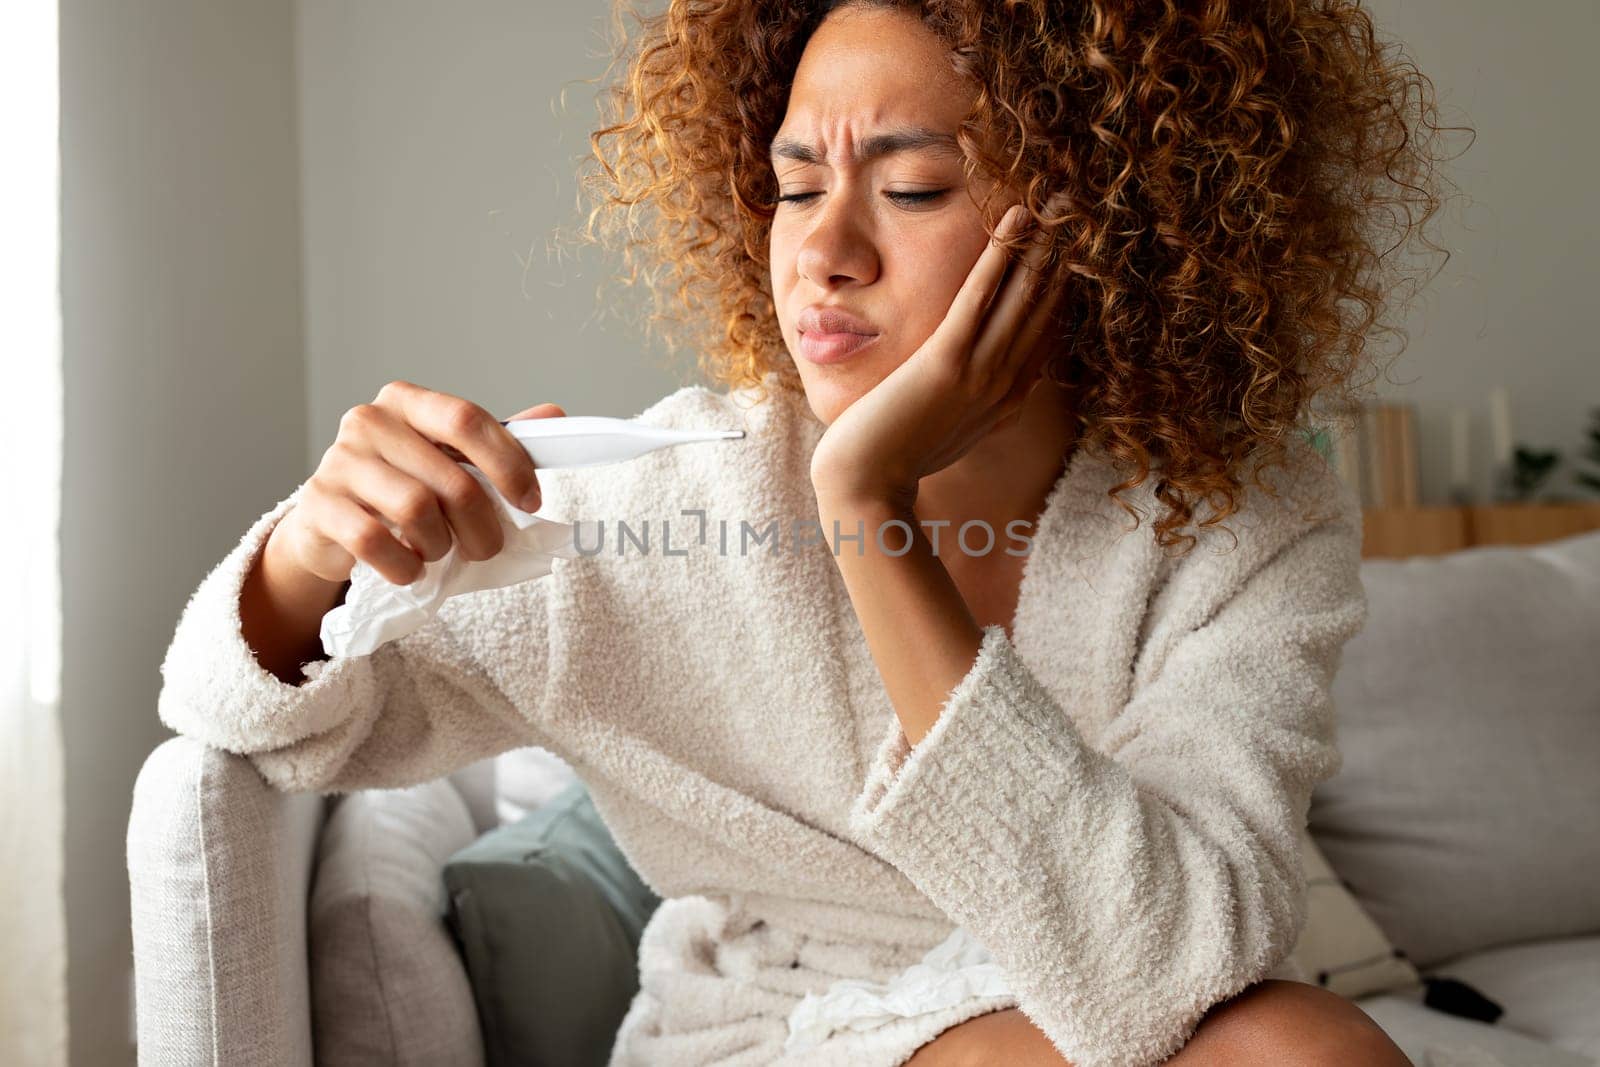 Sick woman checking temperature with thermometer, sitting on the sofa feeling unwell. Sick woman at home with flu virus having fever. Sickness concept.